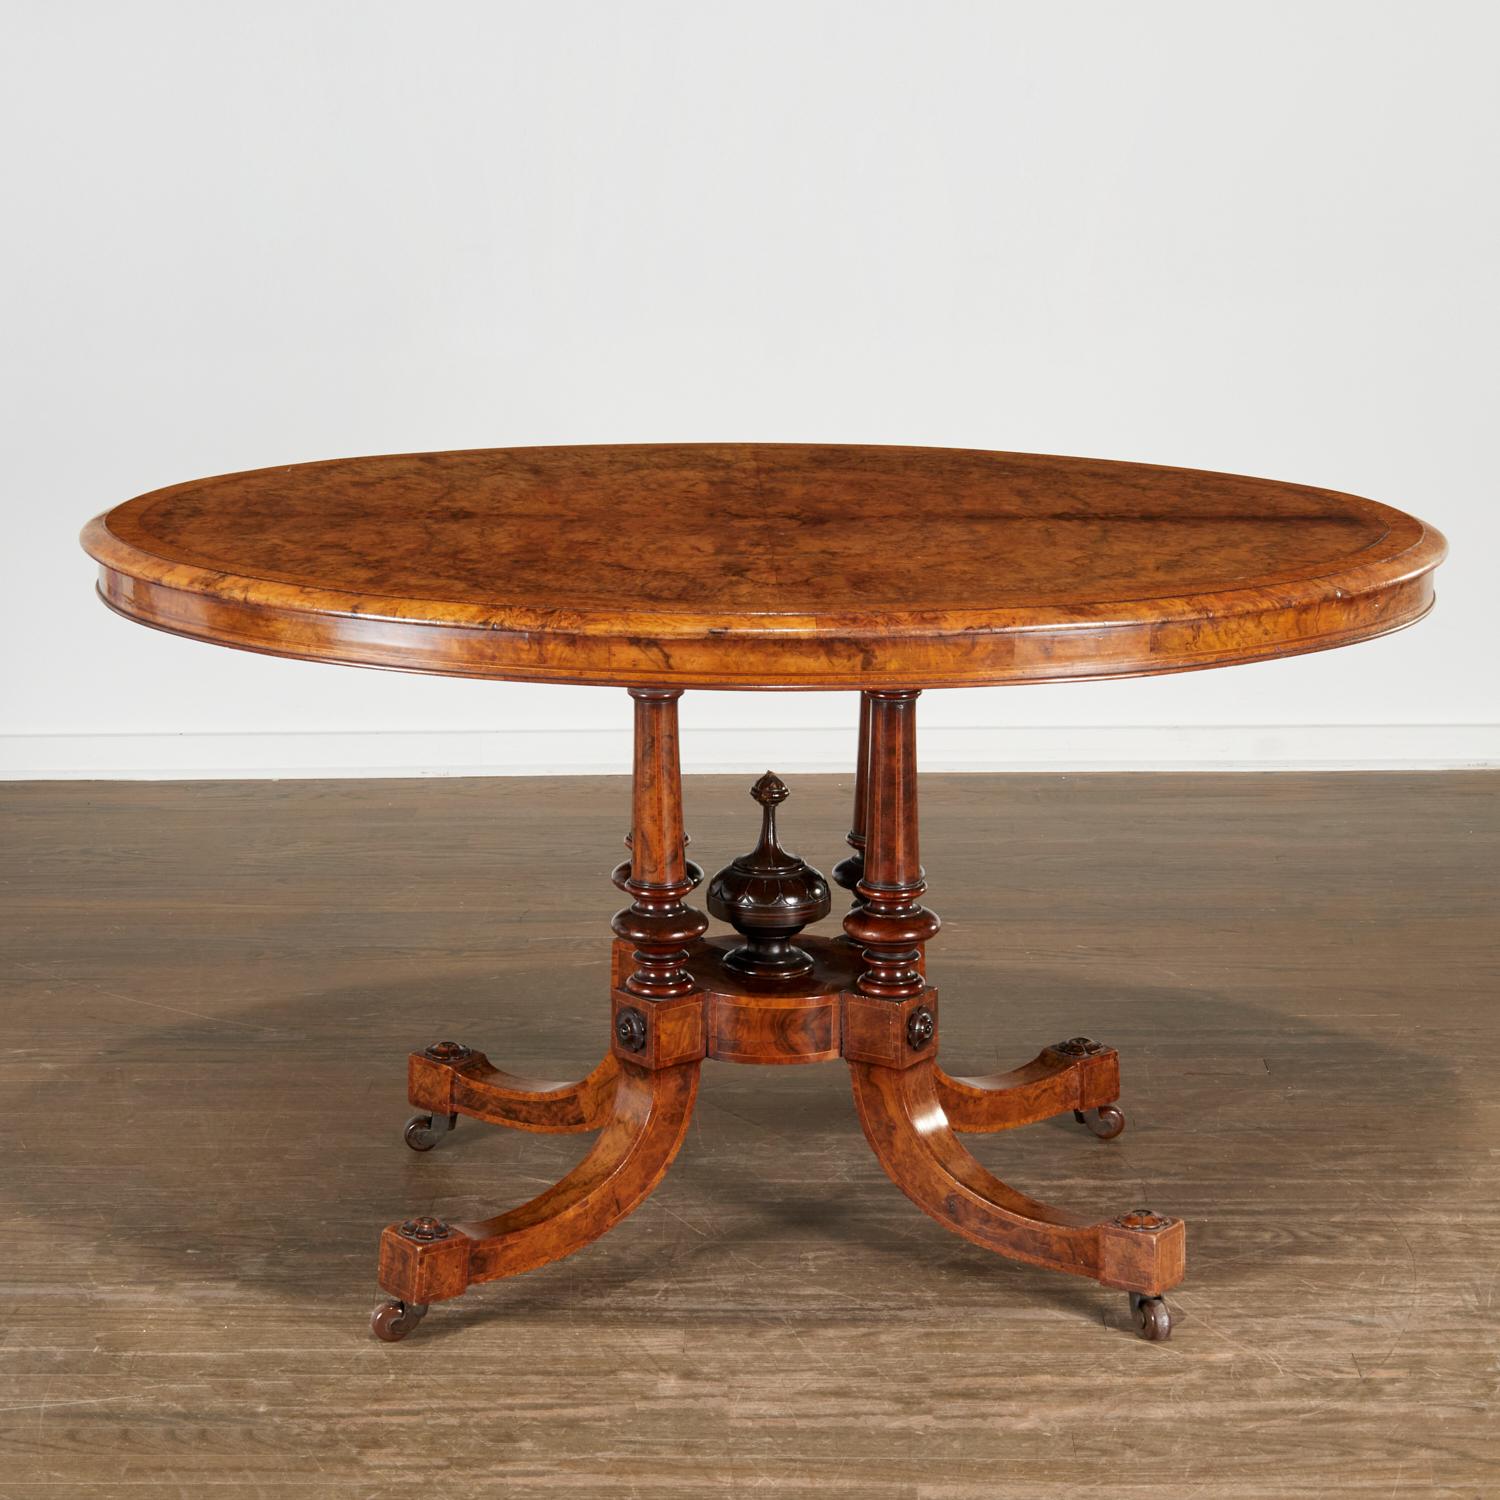 Very handsome breakfast table, 19th c., England. The oval top veneered with highly figured book matched burlwood, with burr elm banding, over four inlaid turned supports, raised on four down-swept legs applied with carved floral bosses on brass